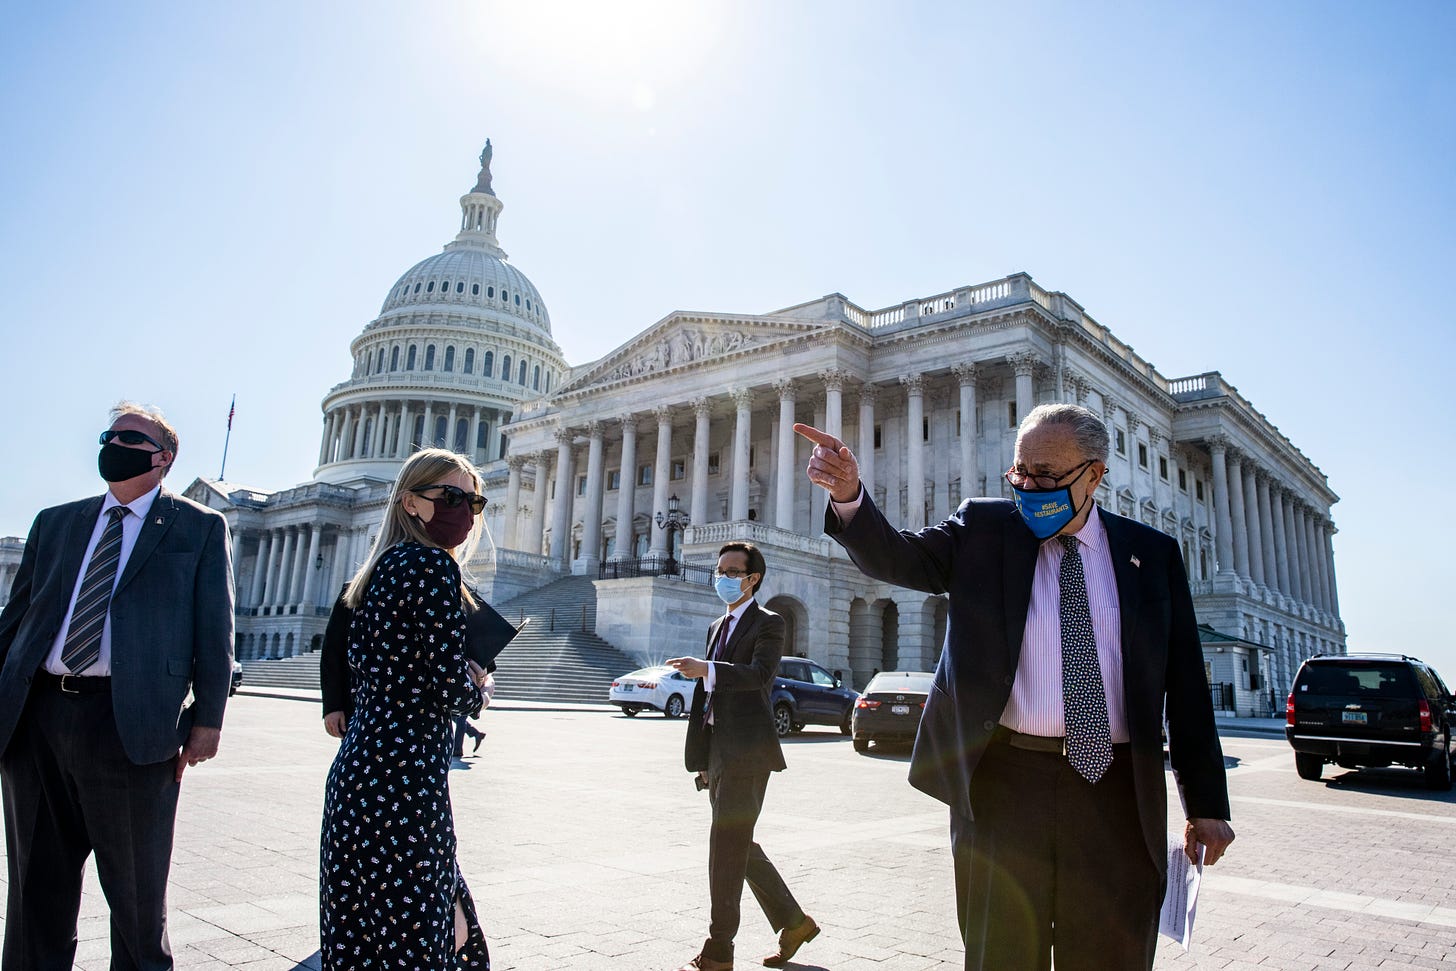 U.S. Senate Majority Leader Sen. Chuck Schumer (D-NY) walks to start a press conference at the US Capitol on March 10, 2021 in Washington, DC.